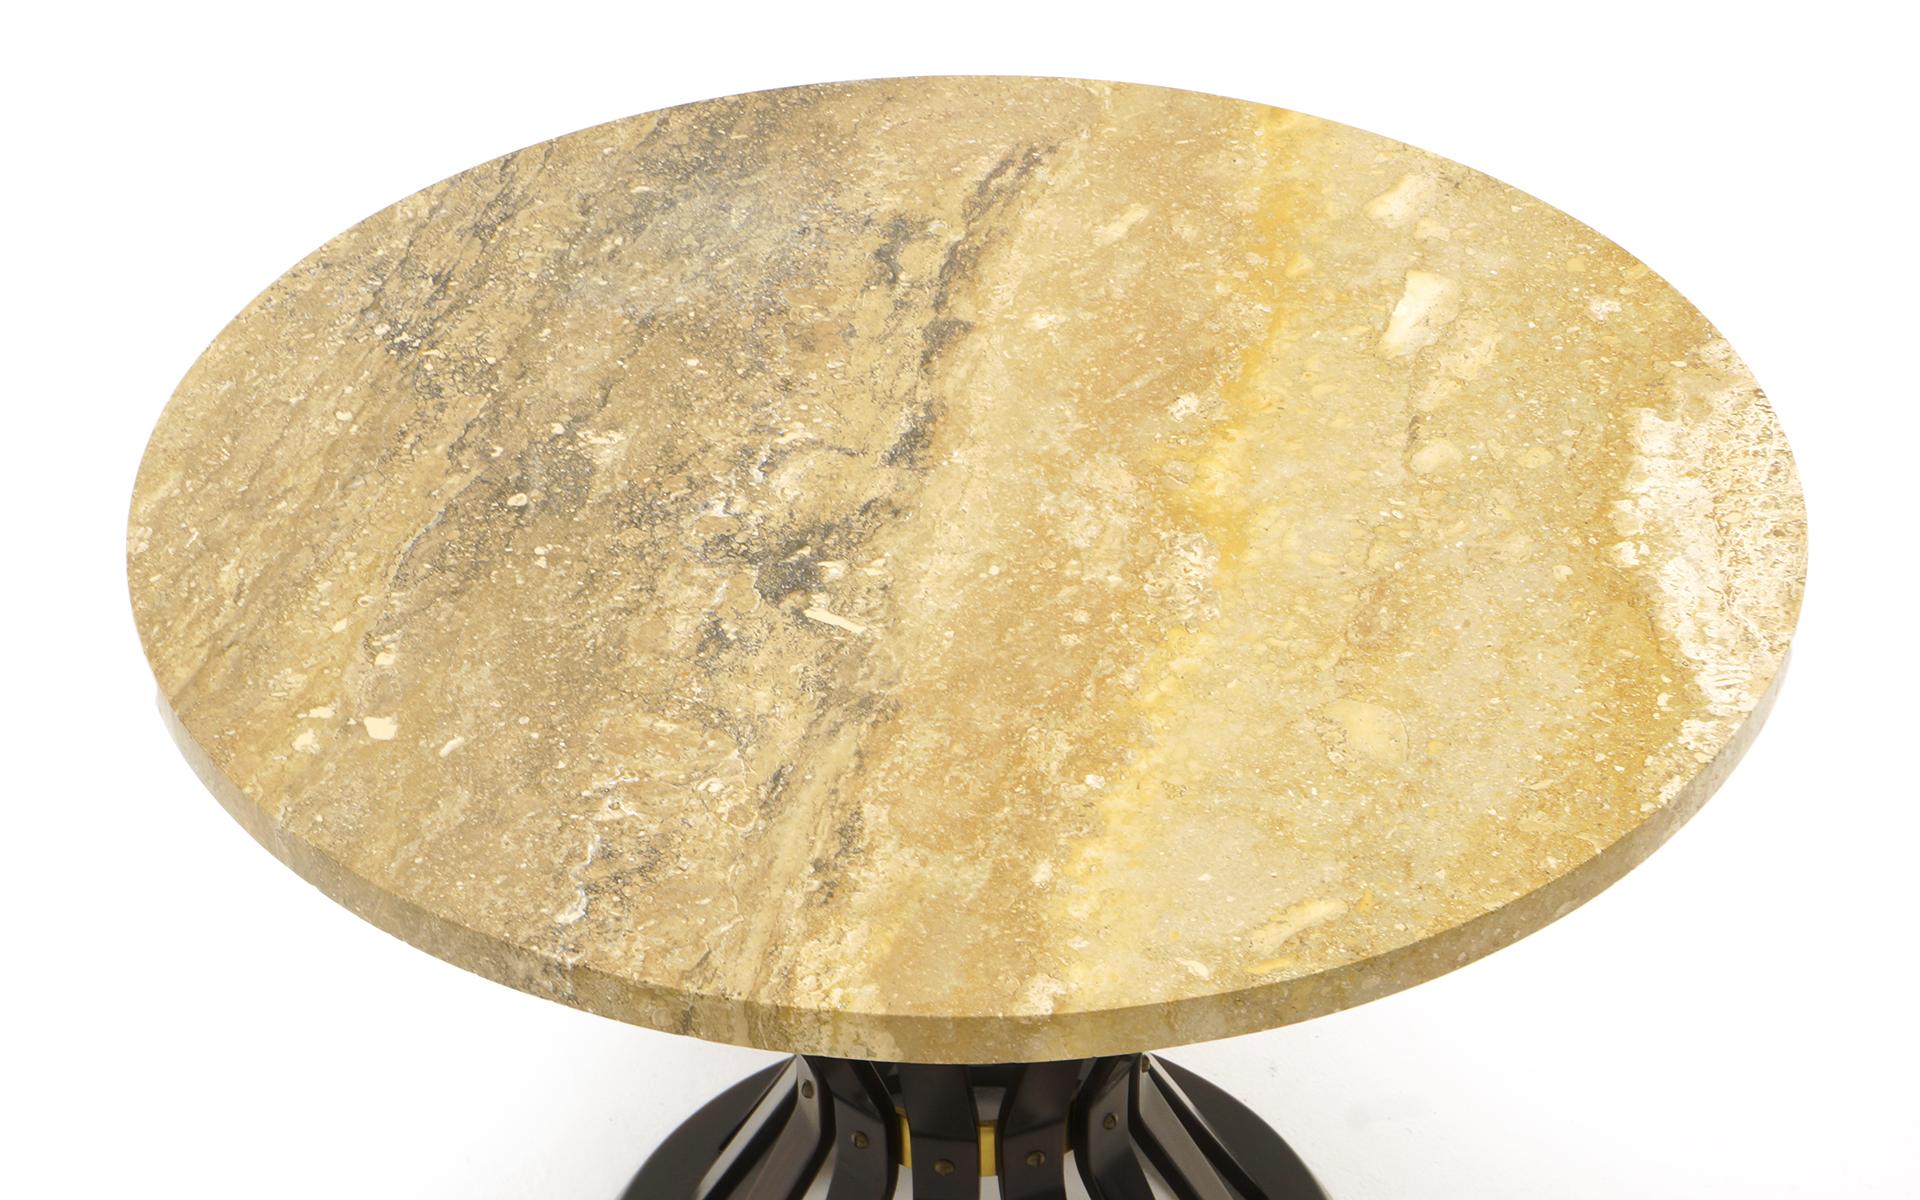 Sheaf of wheat occasional table designed by Edward Wormley. This example has an especially interesting travertine top. Lots of beautiful variation in the stone. Signed with the gold Dunbar metal tag.